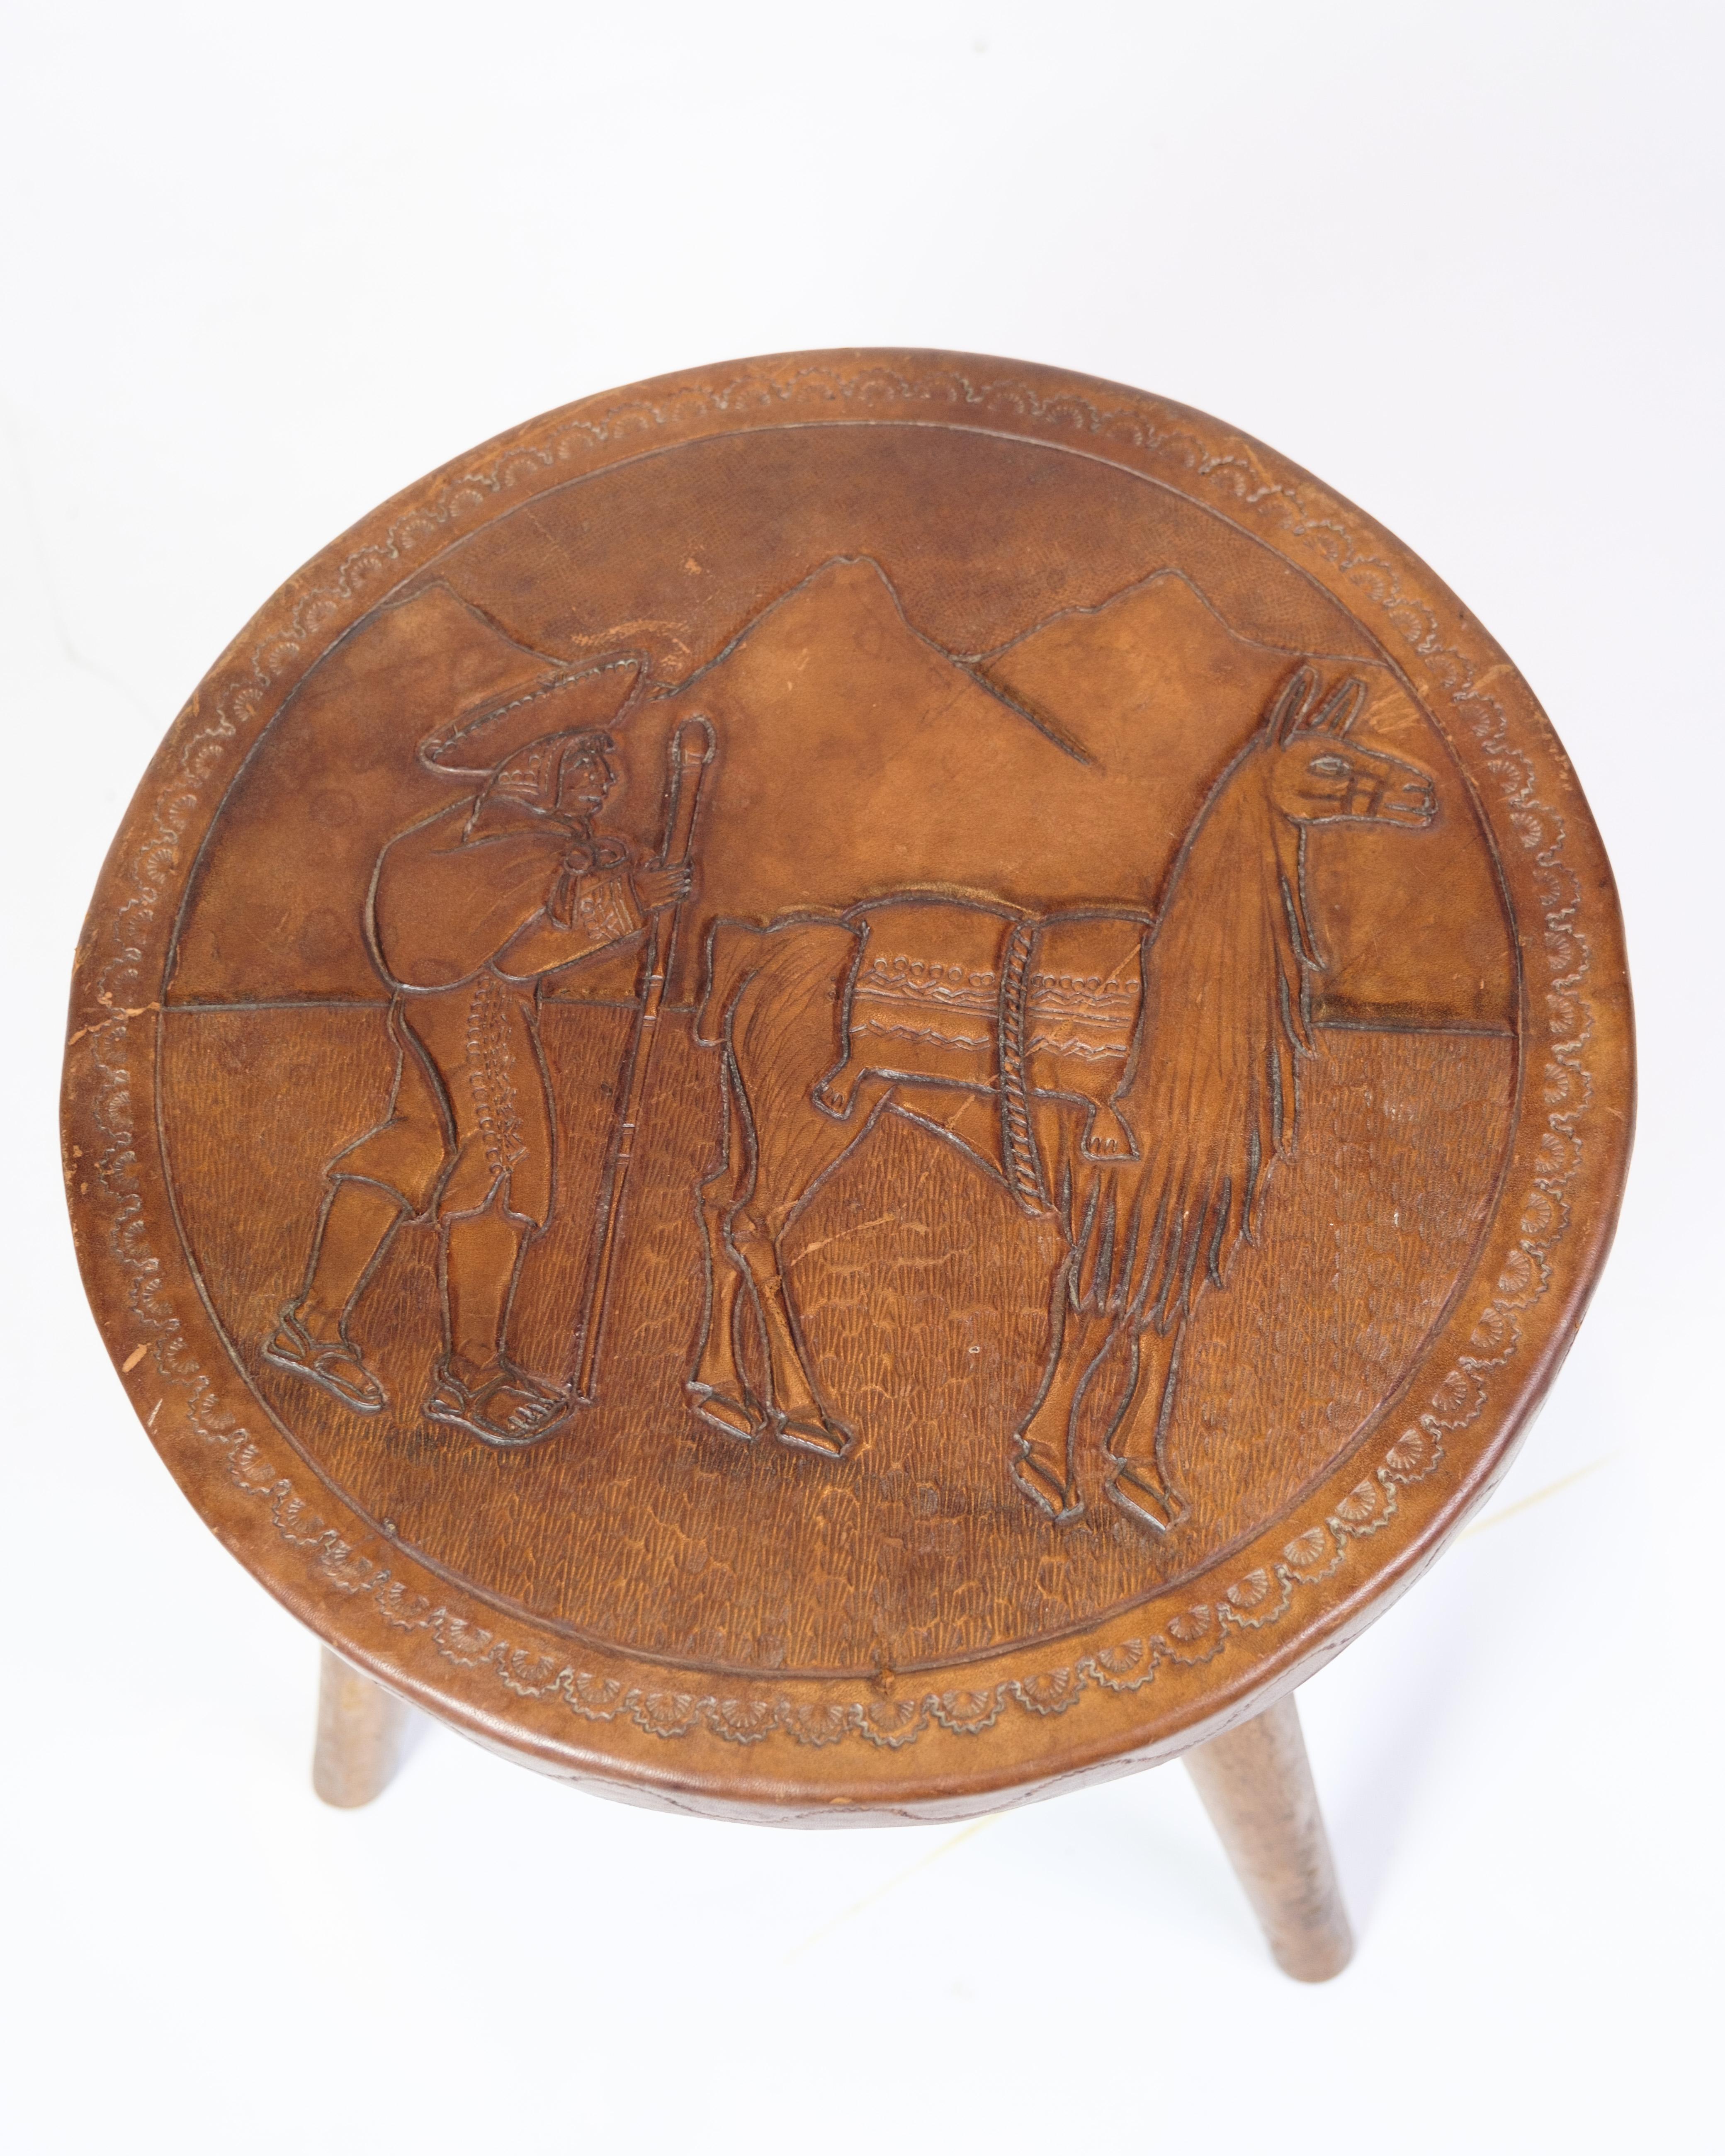 This antique stool is a specimen of fine craftsmanship, bearing a motif of a farmer with an alpaca, carved with care and precision. The motif not only shows a beautiful staging of peasant life, but also a tribute to the beauty of nature and rural